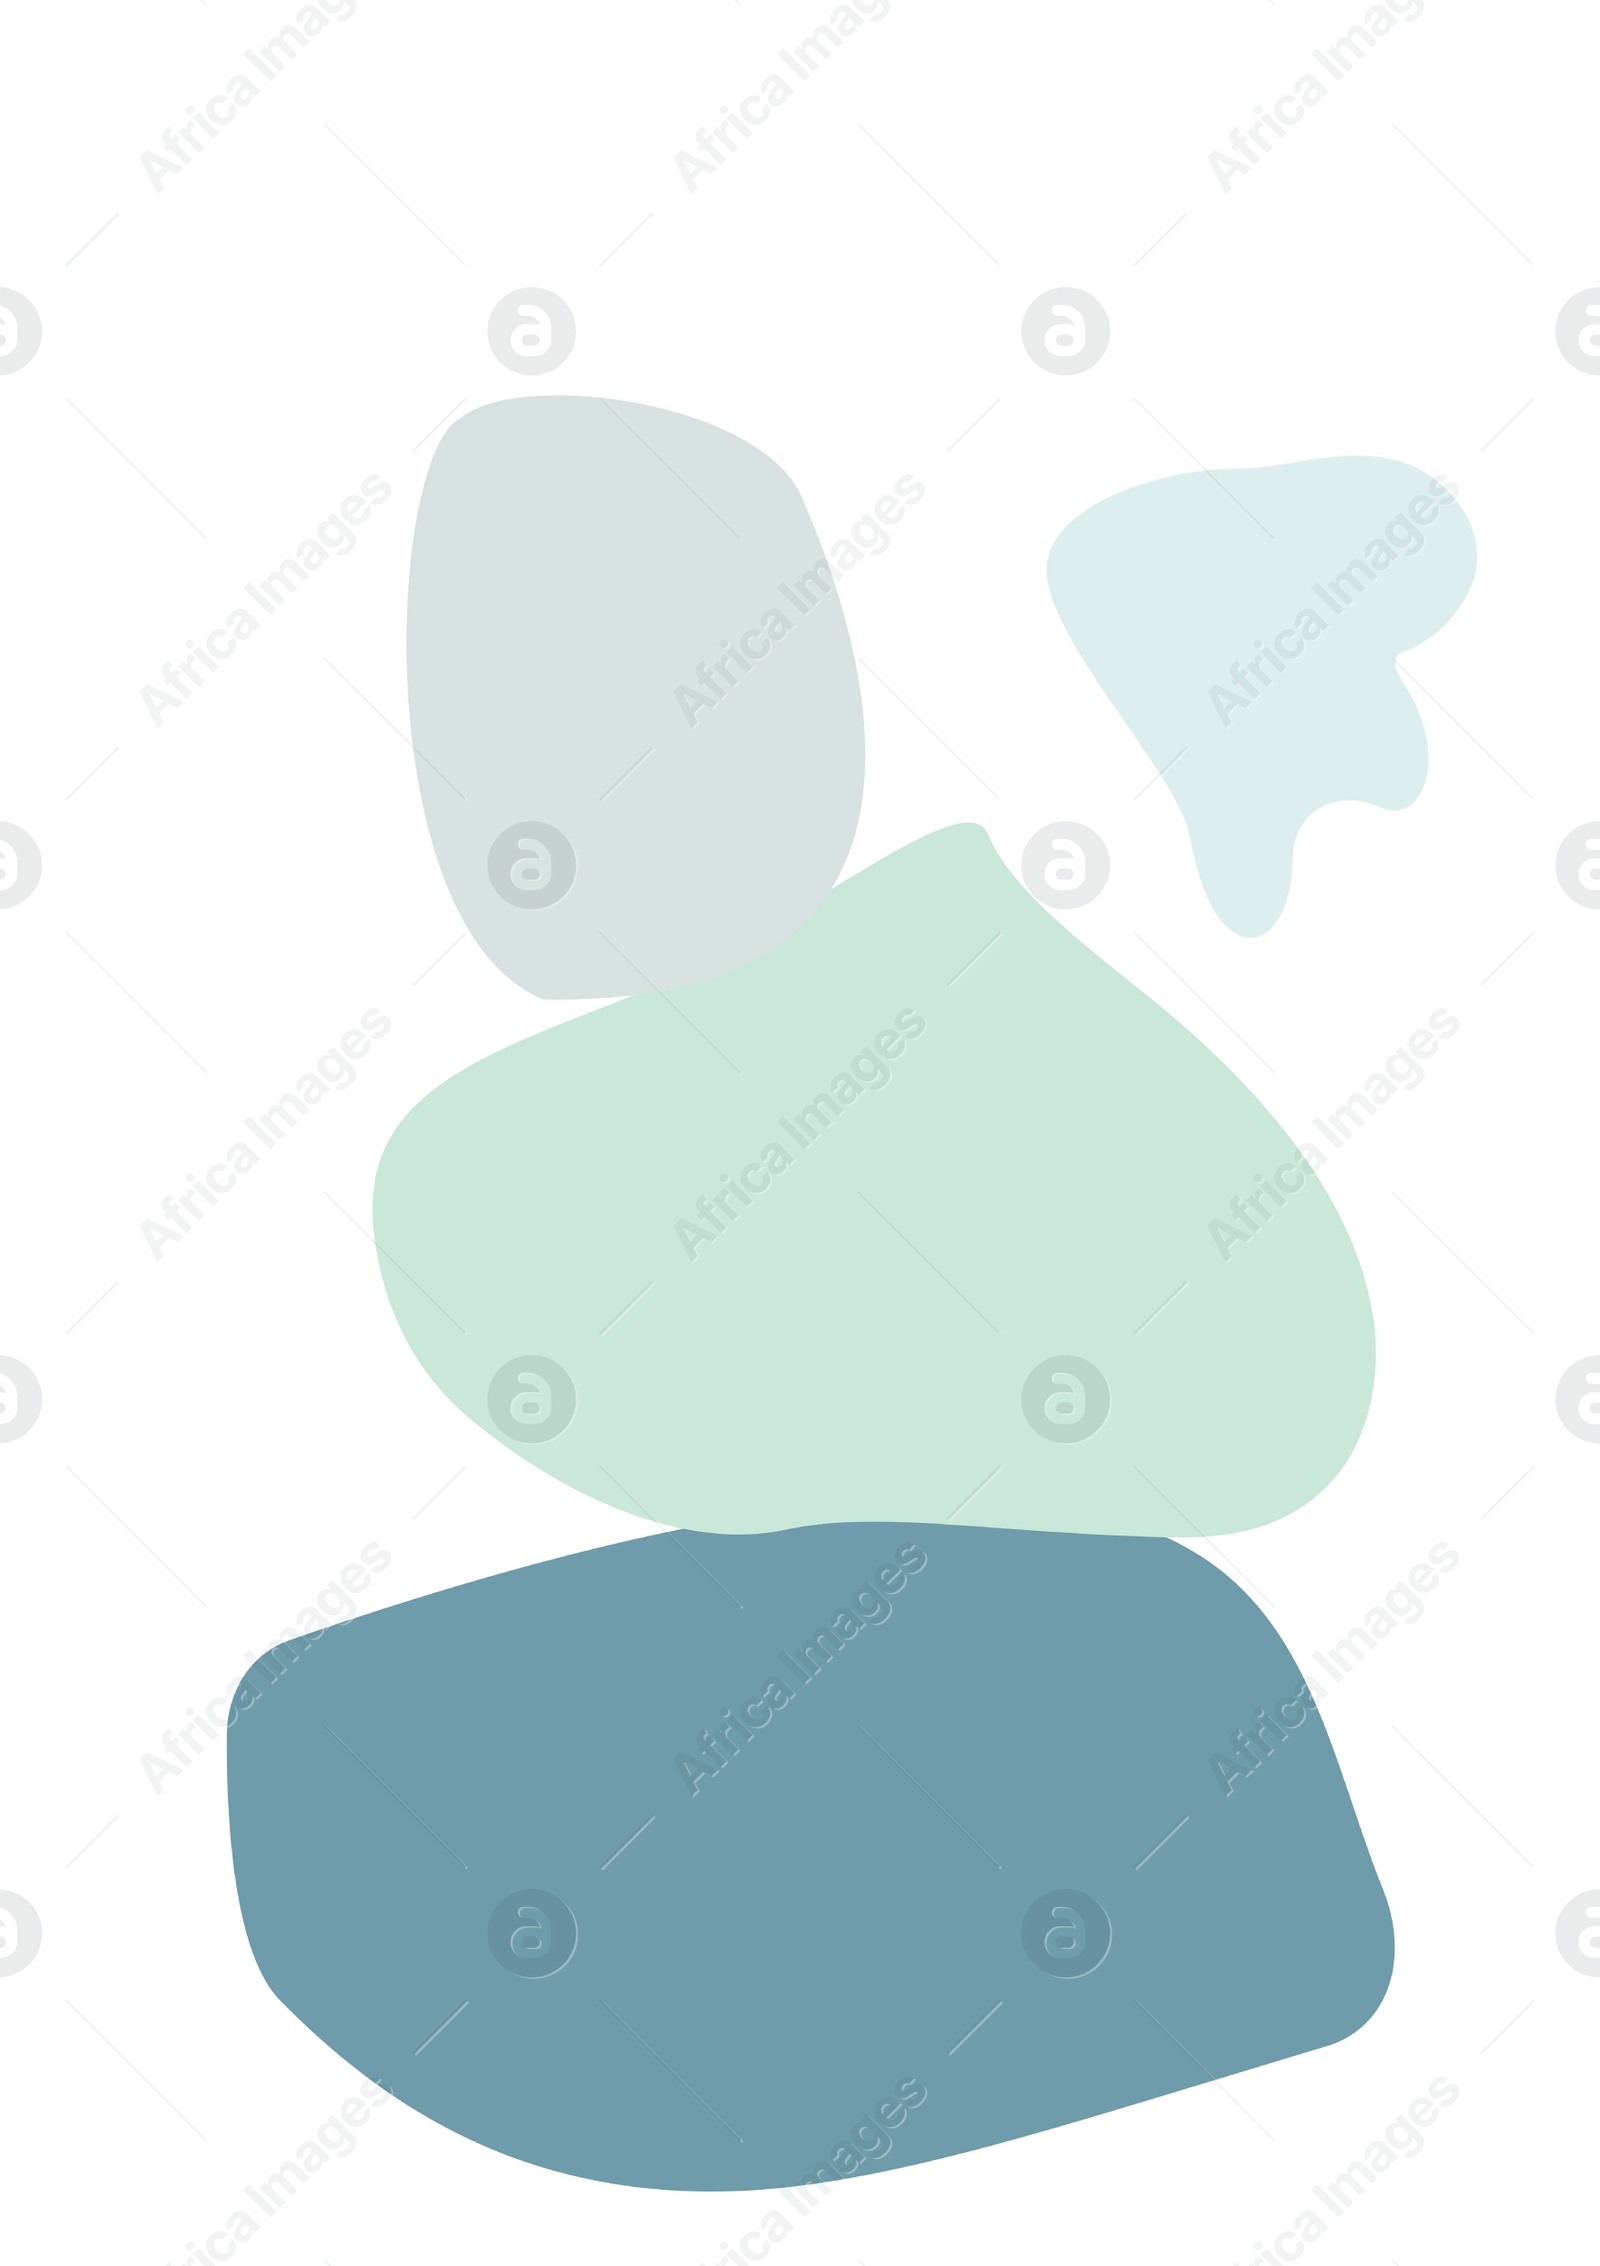 Illustration of Beautiful image with abstract shapes in different colors